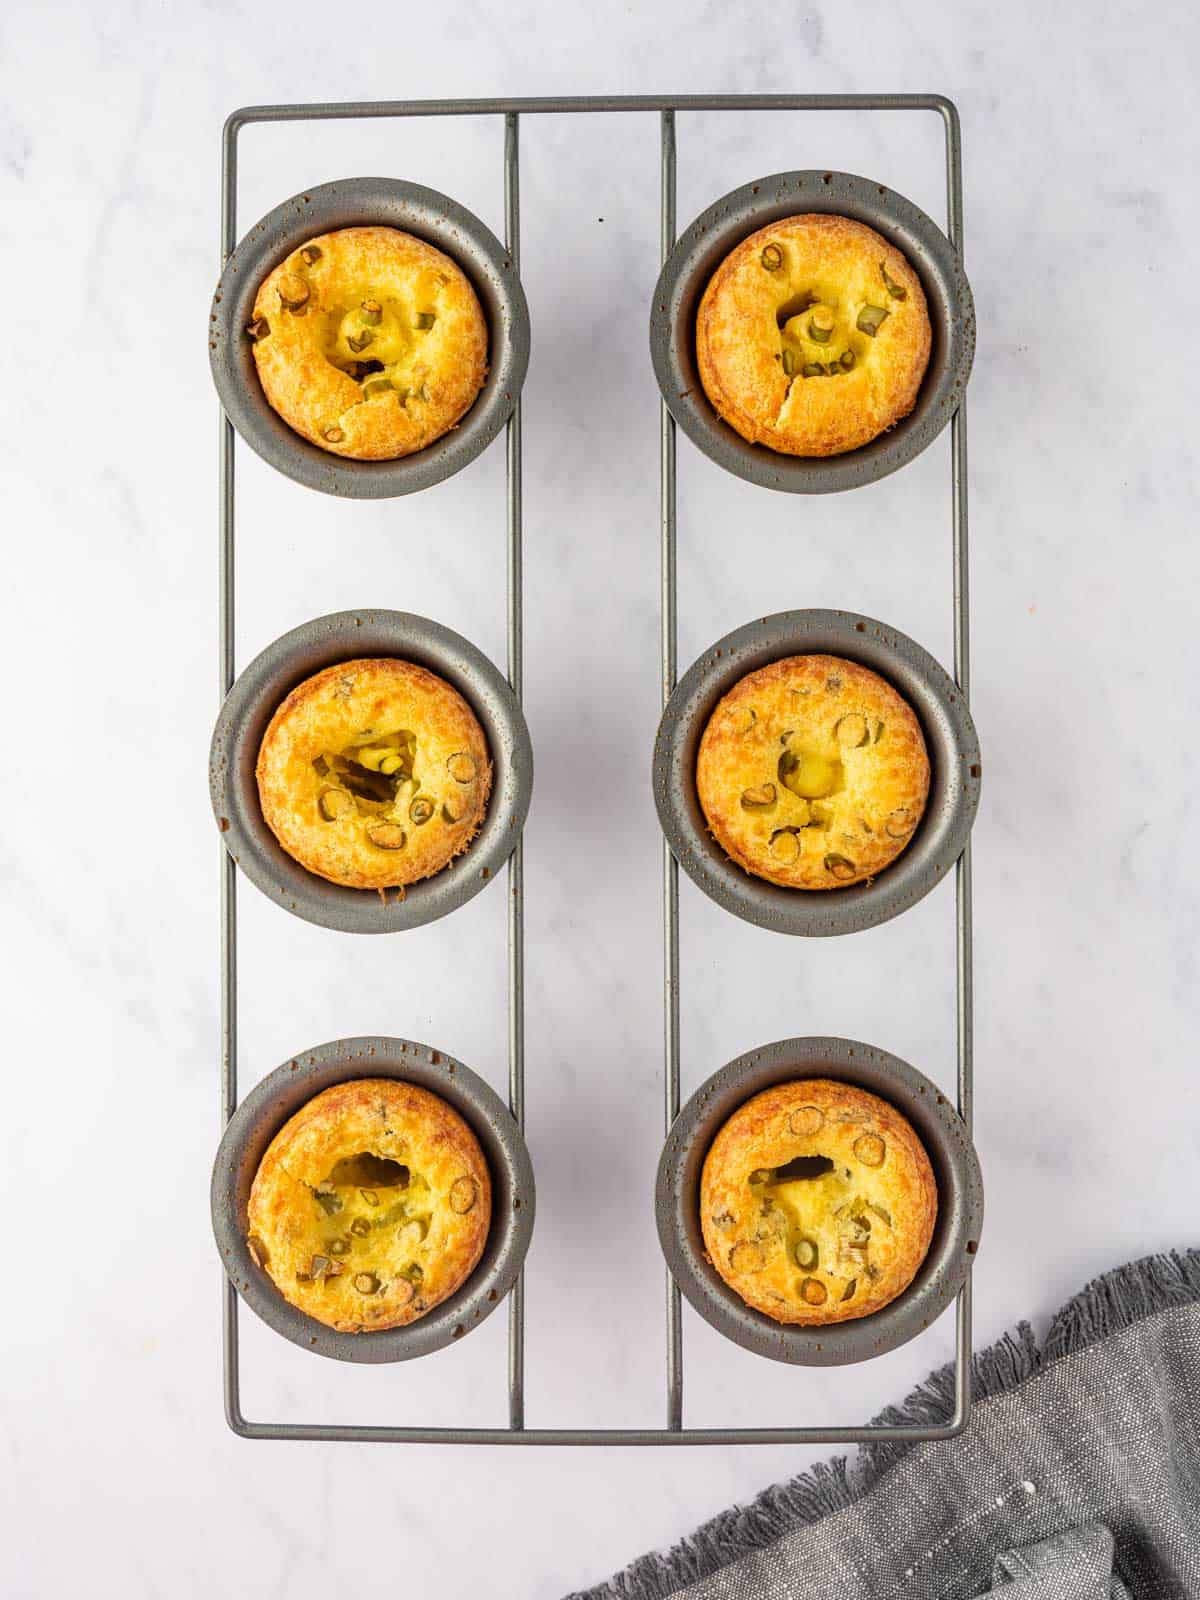 Baked cheesy popover in a popover pan.